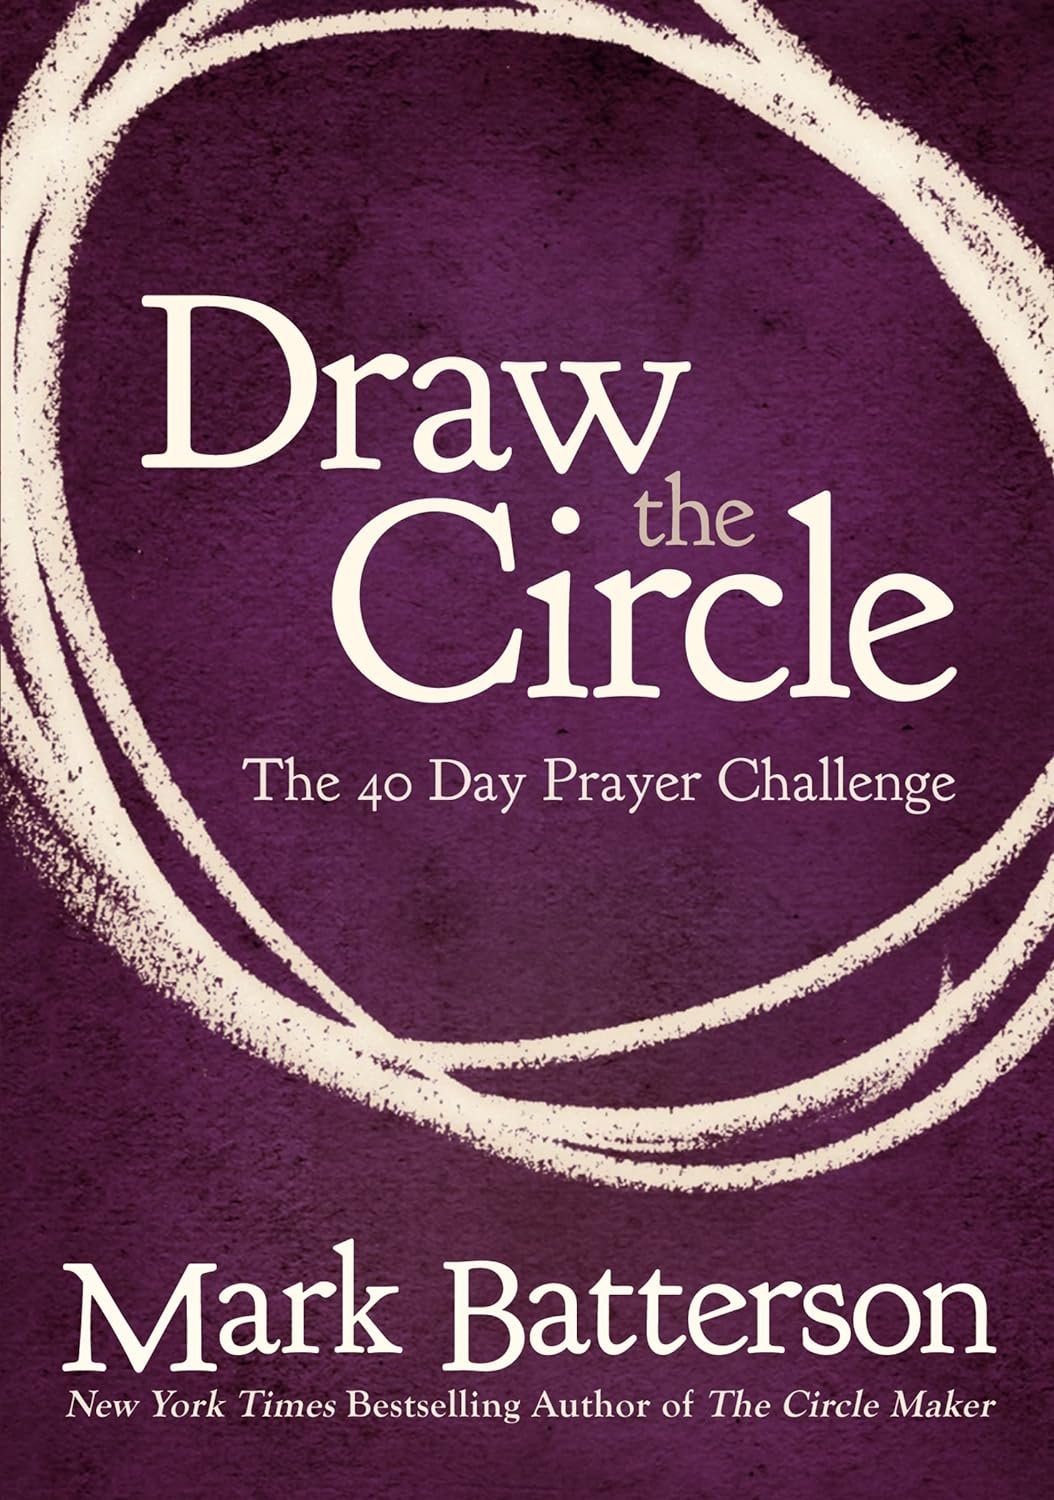 “Draw the Circle: The 40 Day Prayer Challenge” - by Mark Batterson